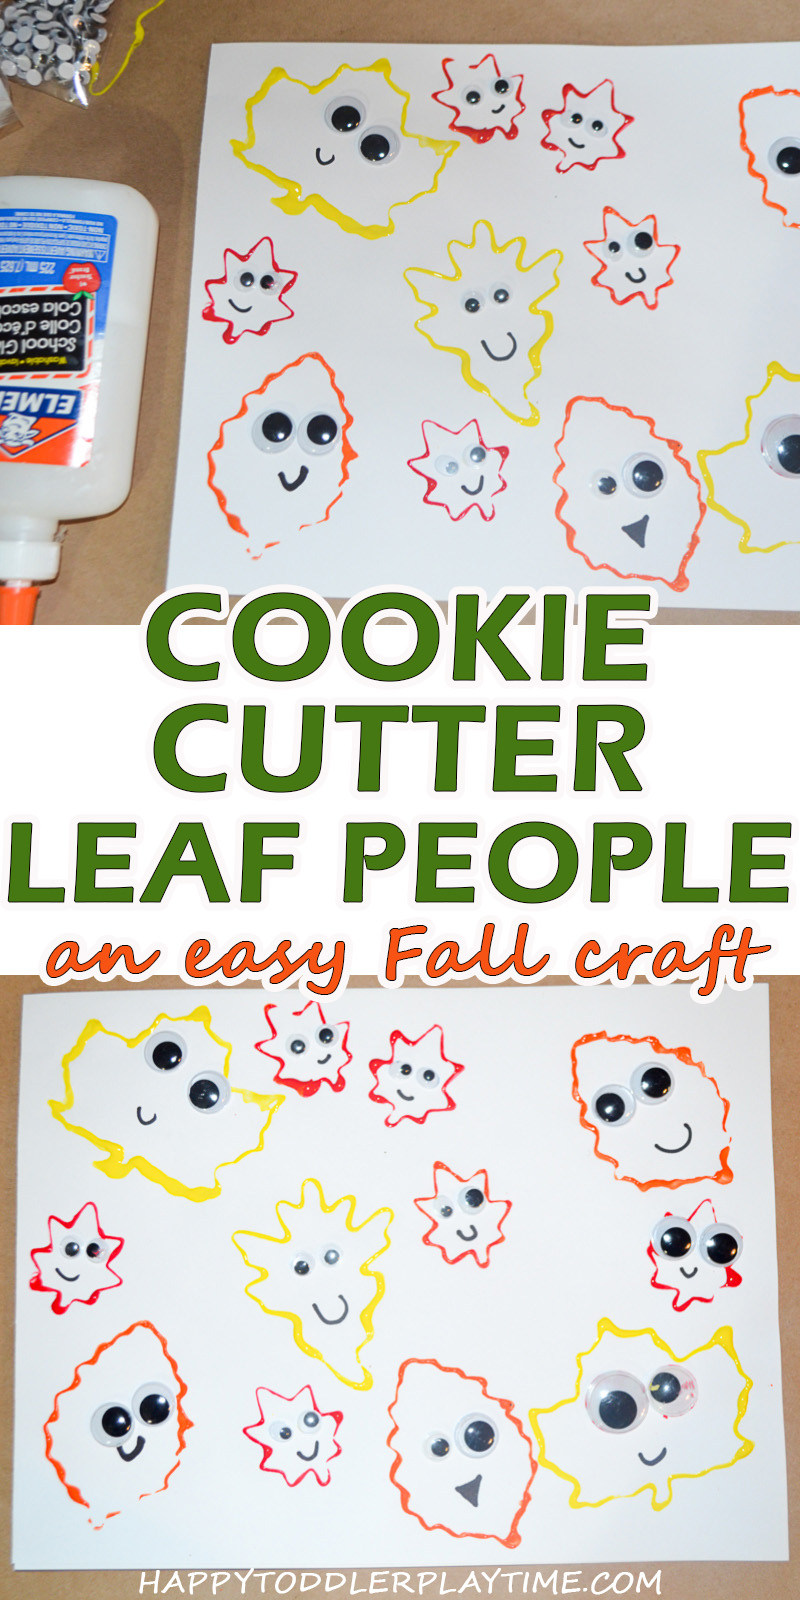 Cookie Cutter Leaf People Craft for toddlers and preschoolers